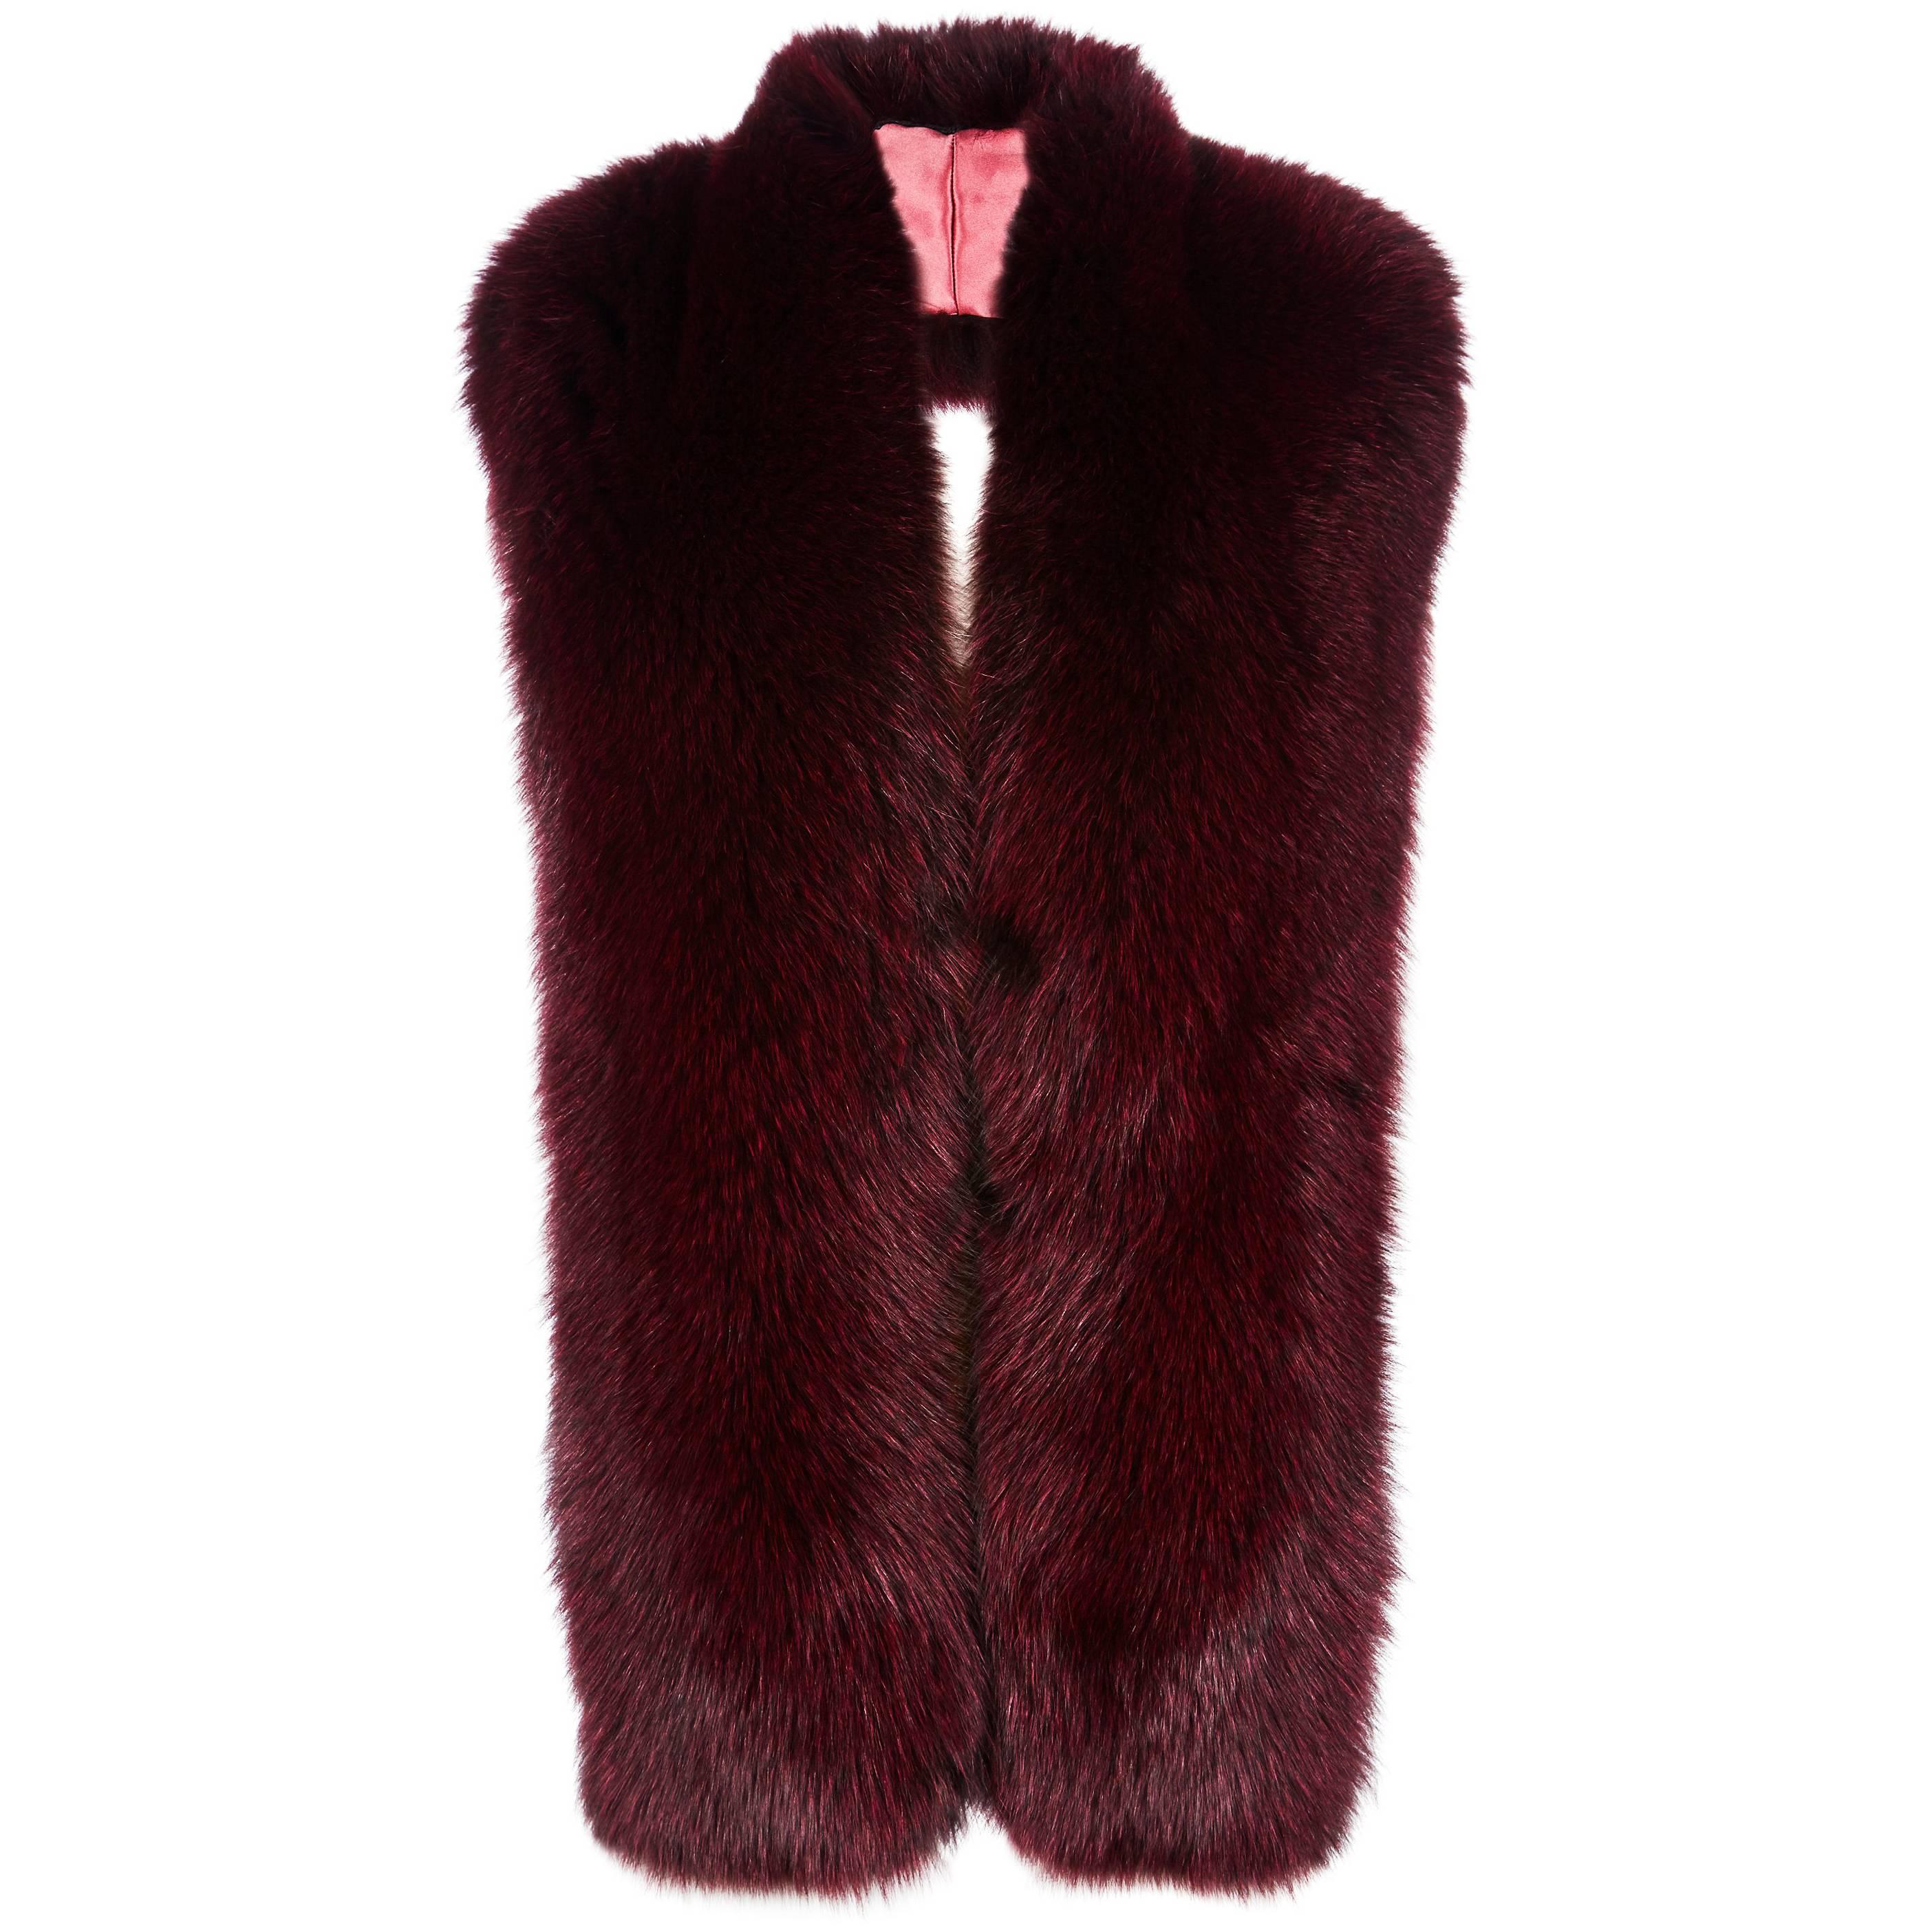 Verheyen London Legacy Stole in Garnet Burgundy Fox Fur - Brand New (RRP Price)

The Legacy Stole is Verheyen London’s versatile design to be worn from day to night. Crafted in the finest dyed fox fur and lined in coloured silk satin.  A structured